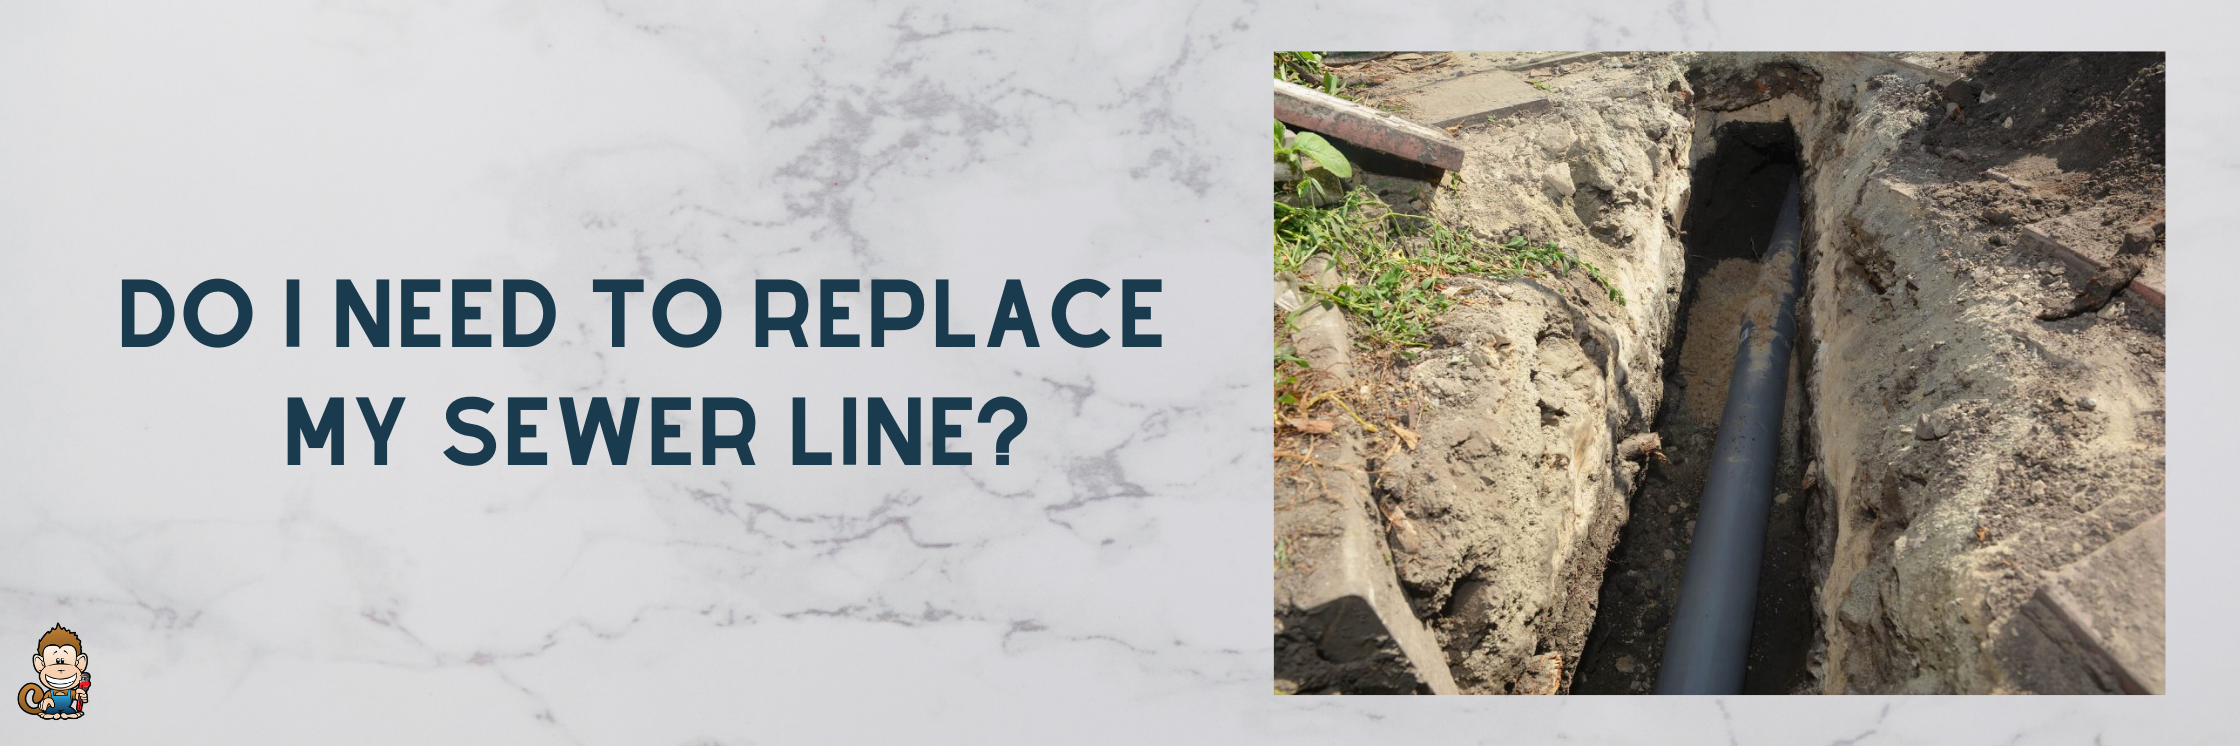 Do I Need to Replace My Sewer Line?